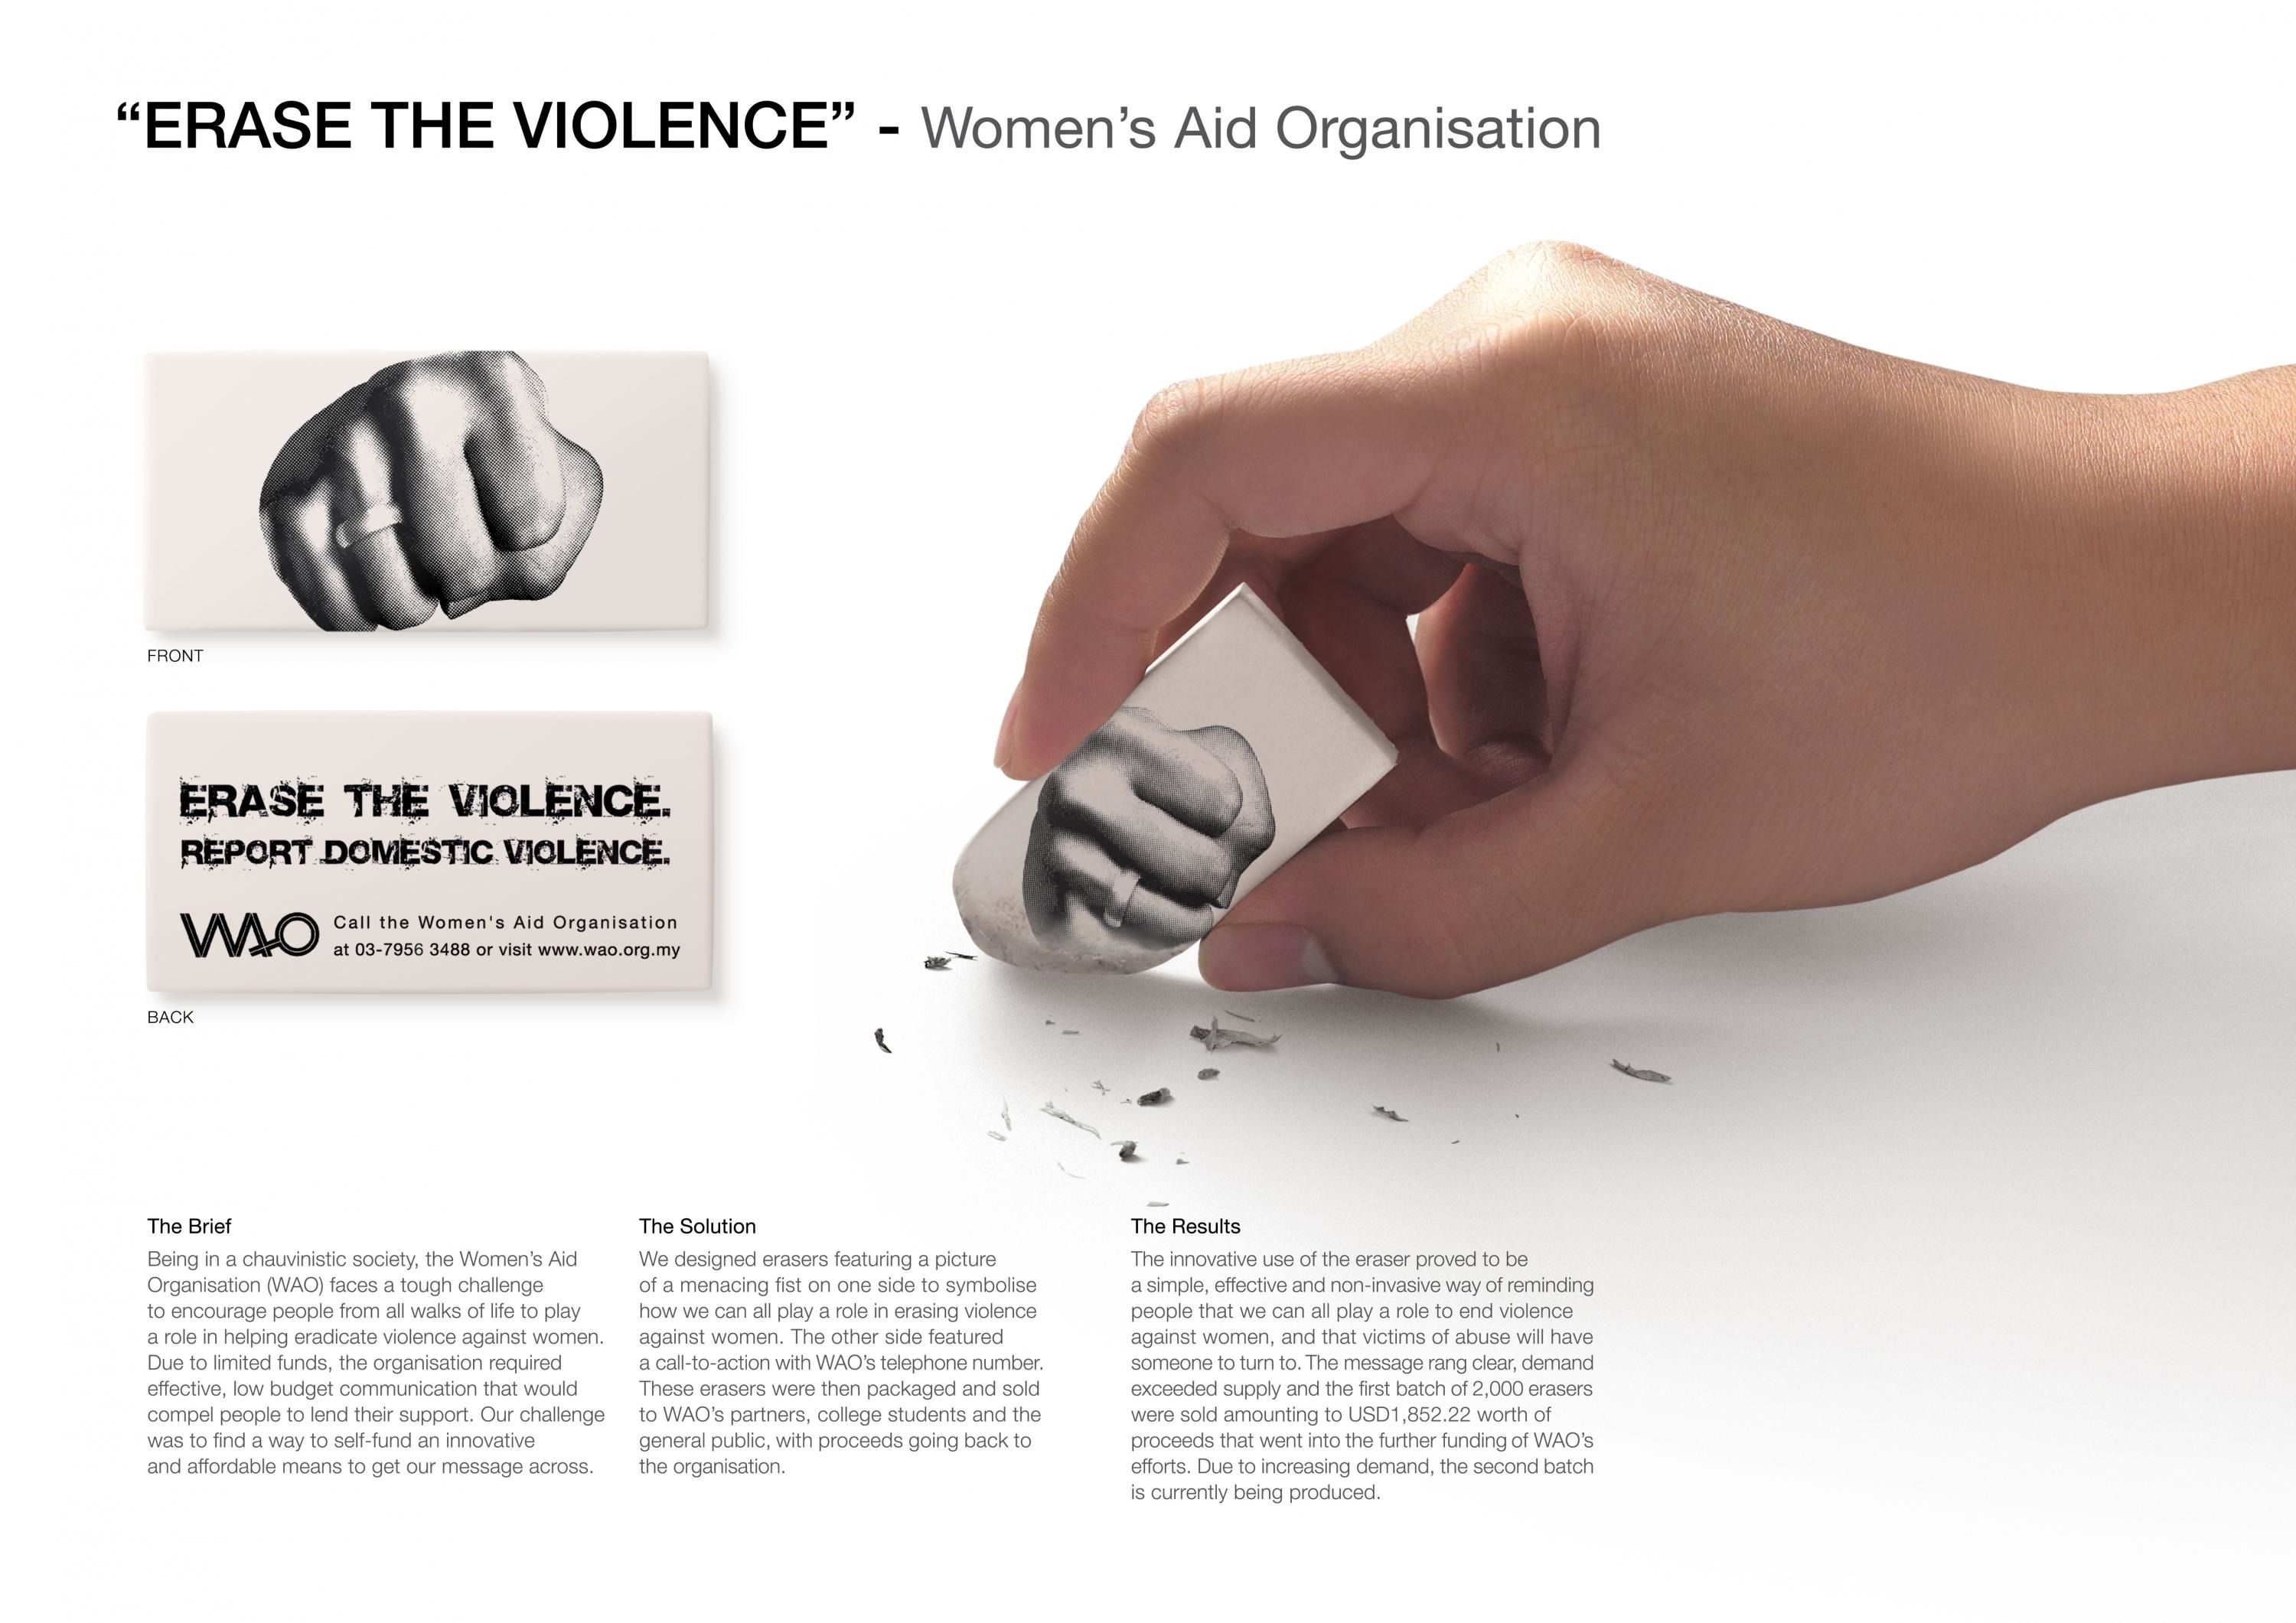 CAMPAIGN TO END VIOLENCE AGAINST WOMEN